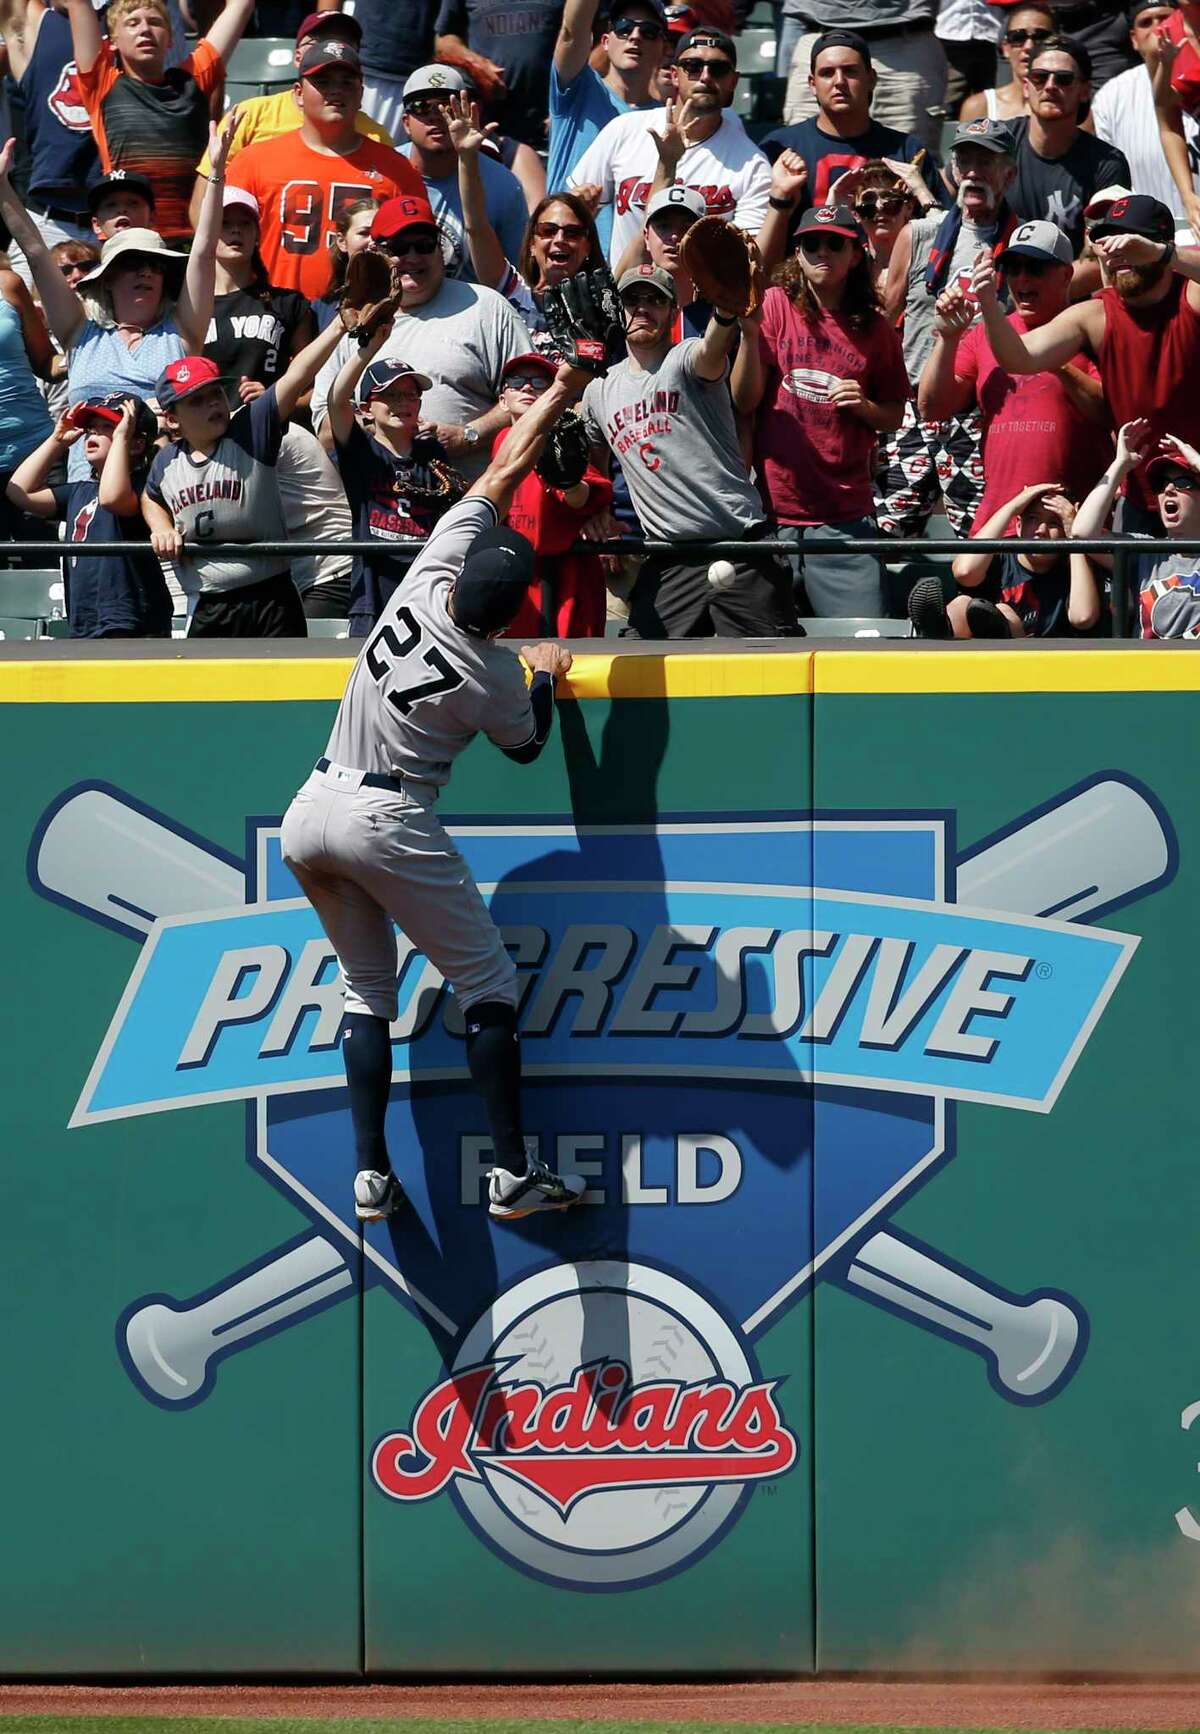 New York Yankees' Giancarlo Stanton (27) attempts to catch a home run by Cleveland Indians' Michael Brantley during the eighth inning of a baseball game, Sunday, July 15, 2018, in Cleveland. (AP Photo/Ron Schwane)